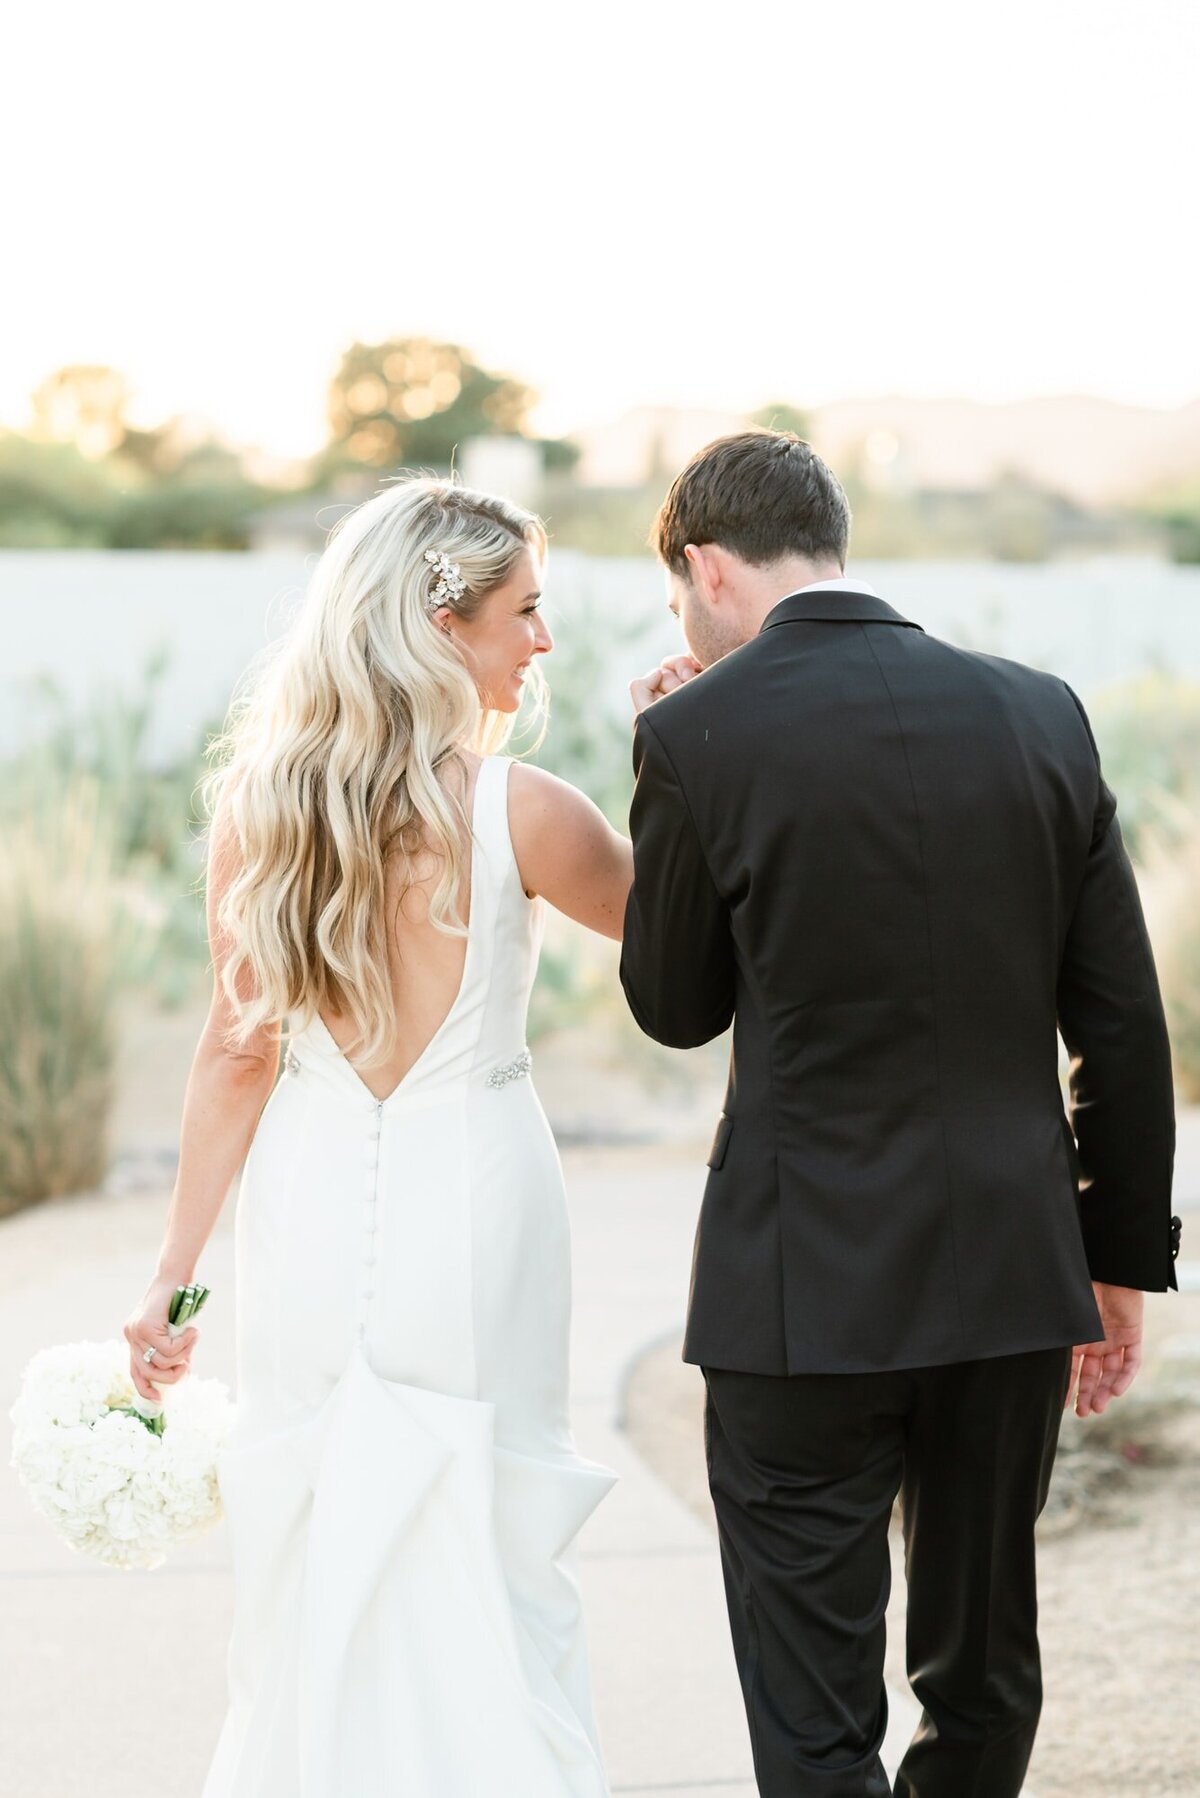 Groom kisses brides hand as the walk down path at Andaz Resort Scottsdale